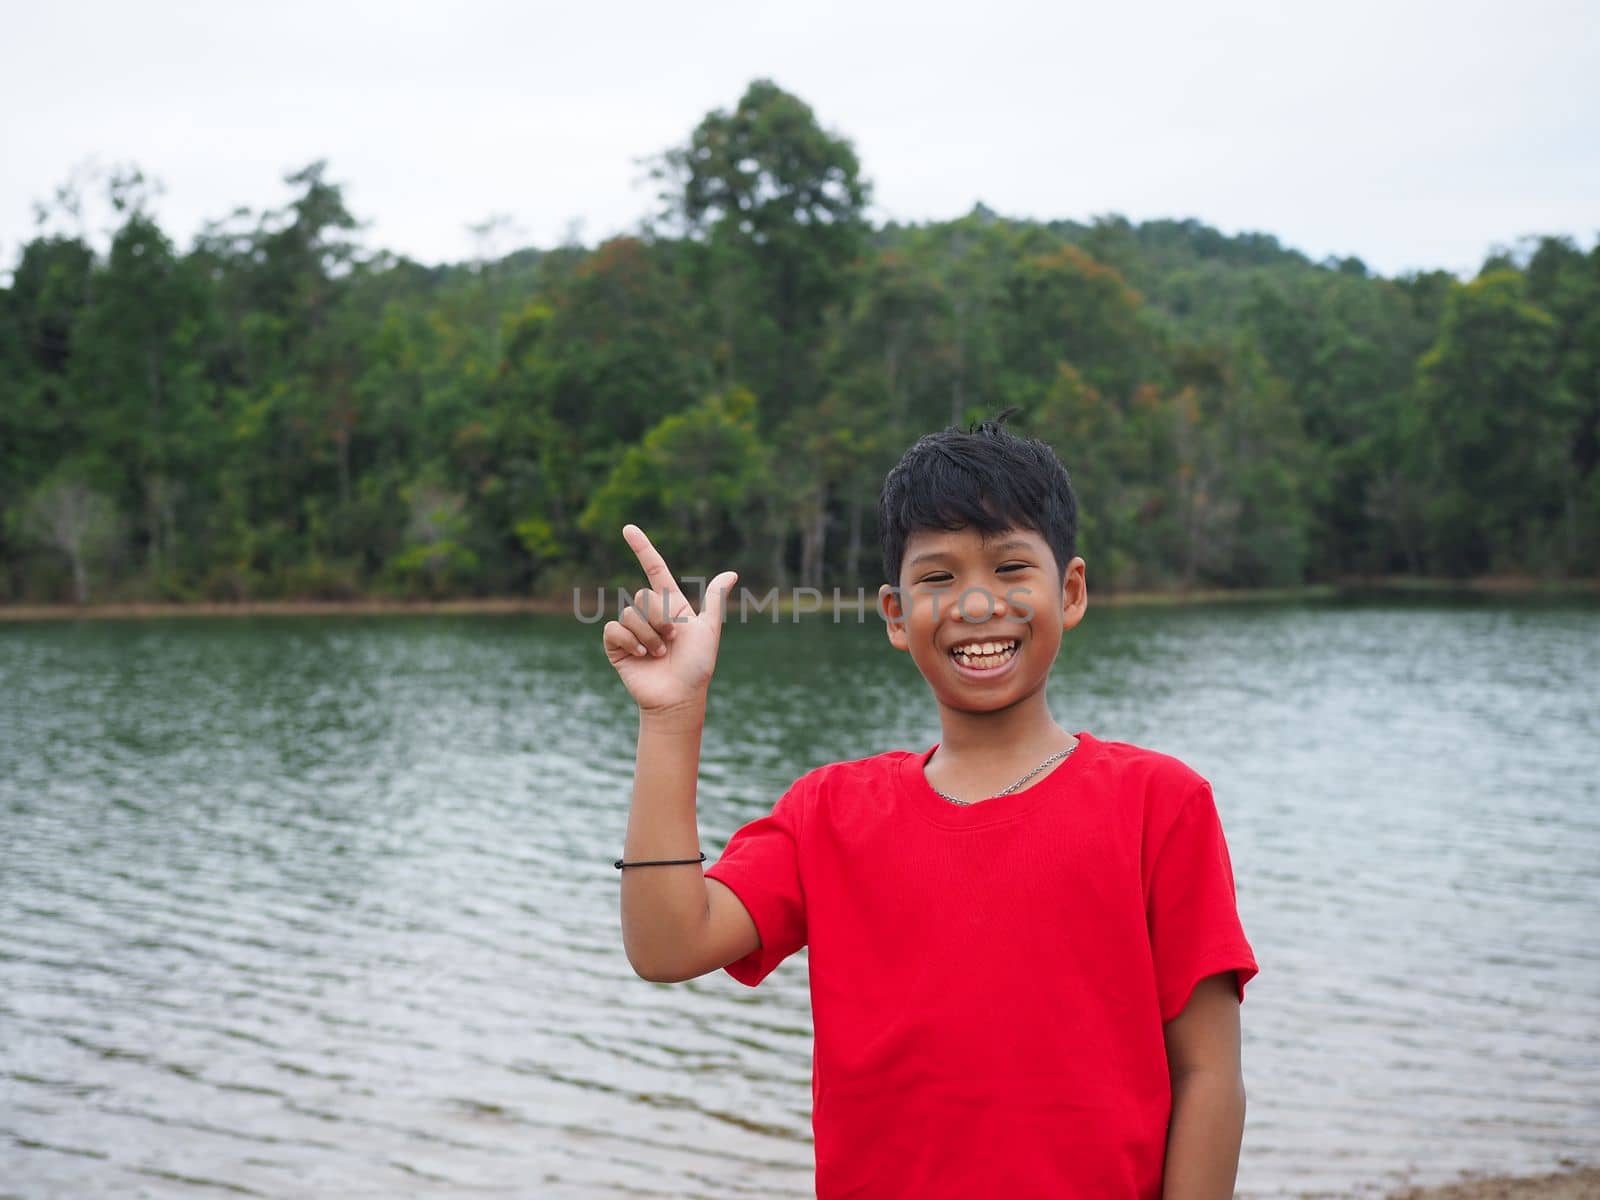 The boy smiled and pointed his hand to his side. On the background is a reservoir. by Unimages2527